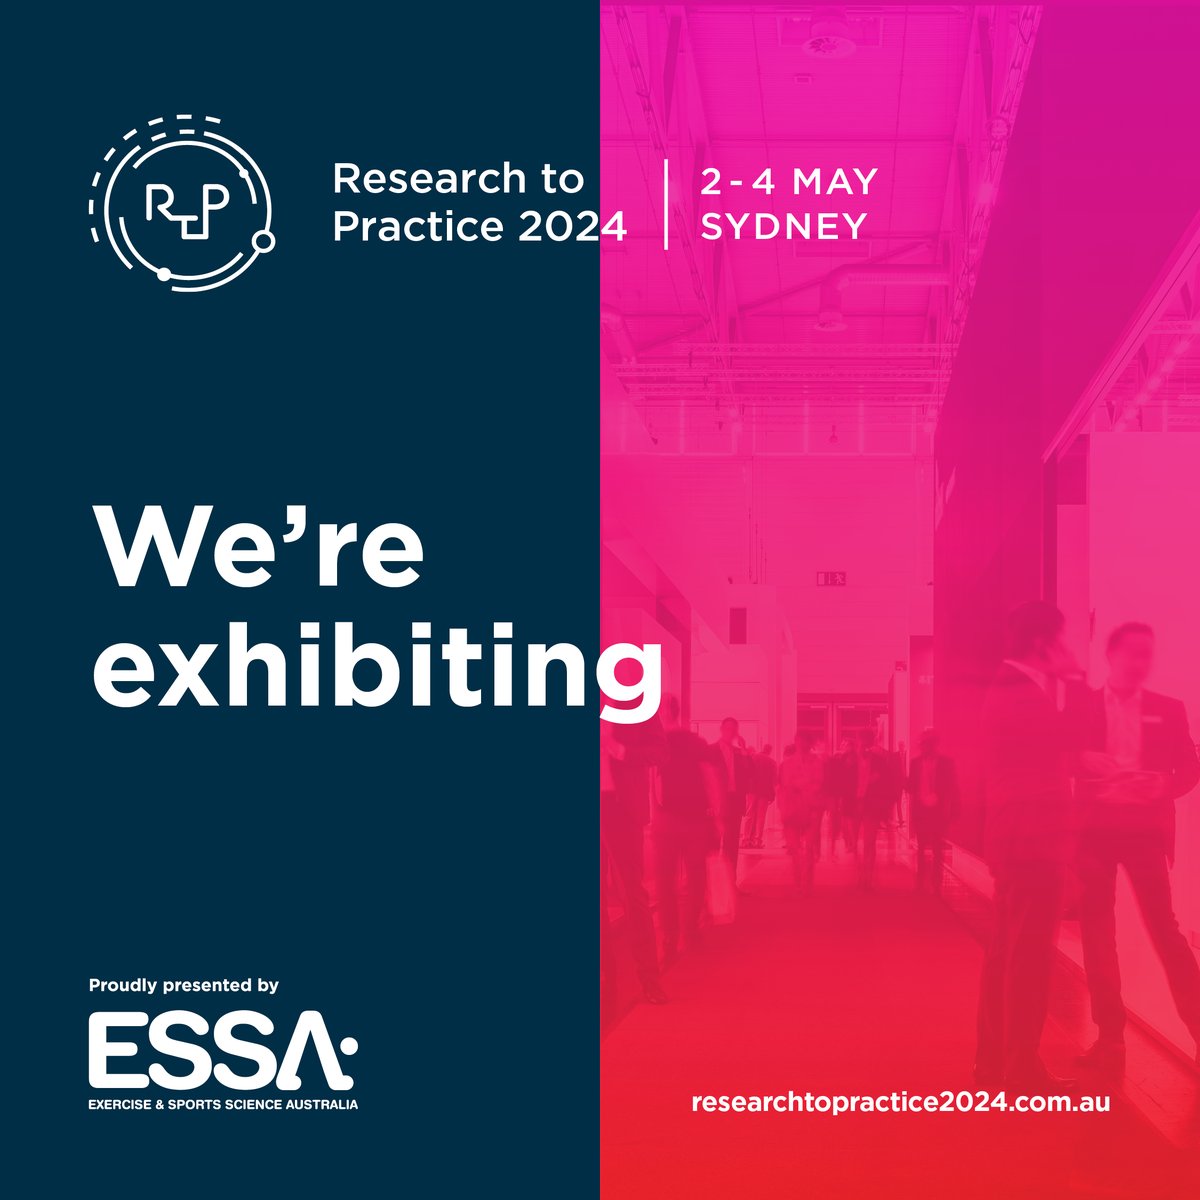 If you are in Sydney this week make sure you come and say hi!

@essa_au #rtp2024 #researchtopractice #exercisephysiology #exercisephysiologylab #exerciseandsportsscience #sportsscience